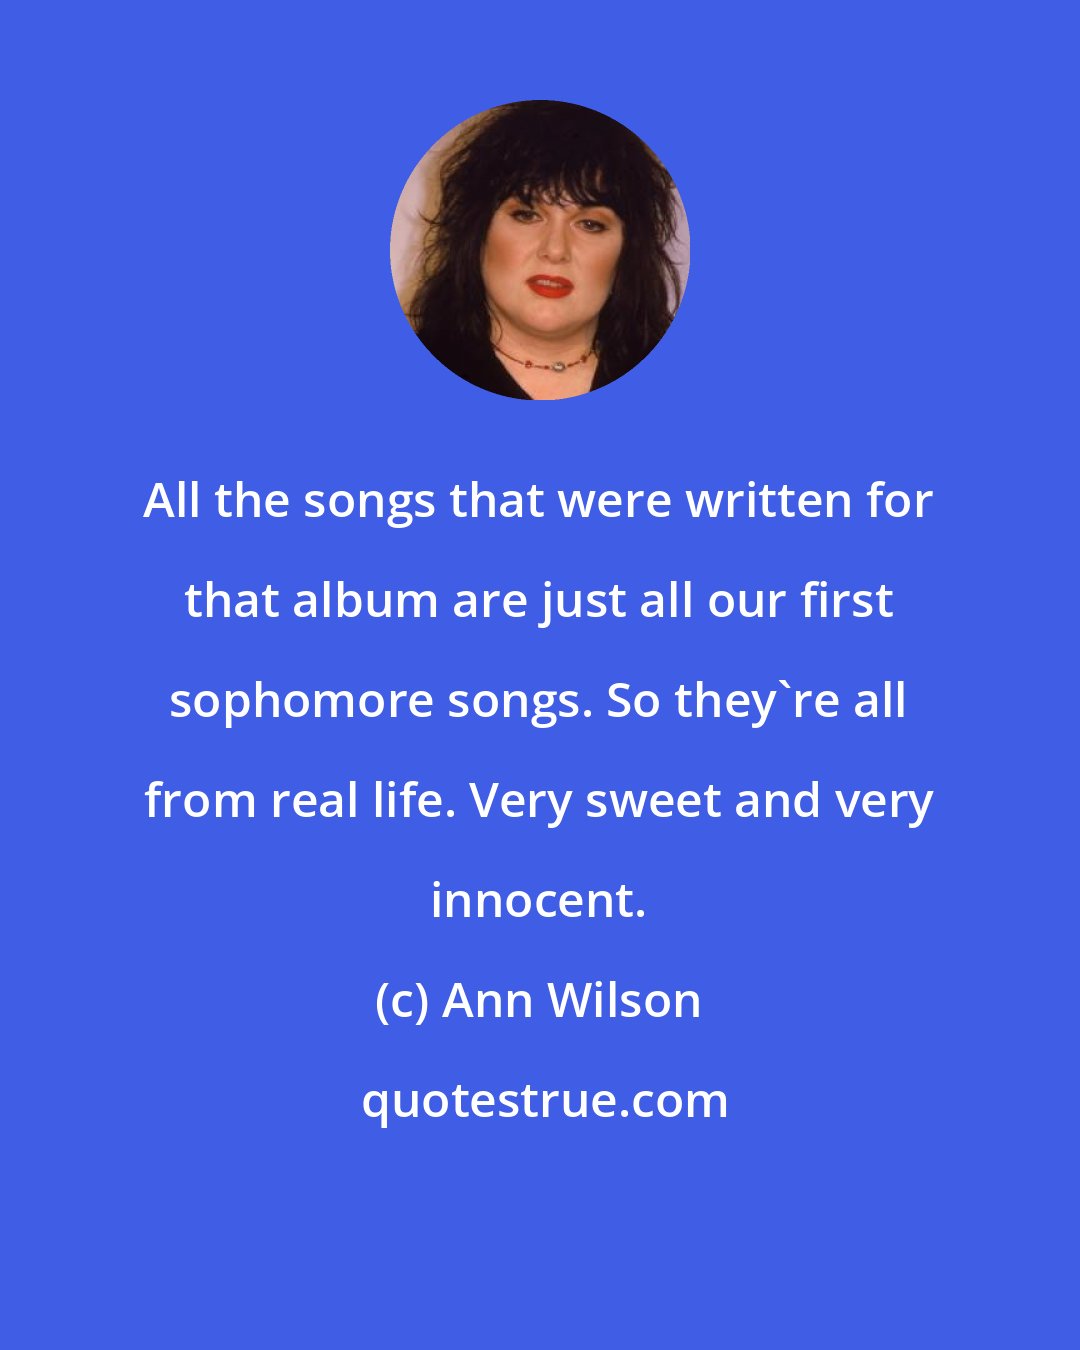 Ann Wilson: All the songs that were written for that album are just all our first sophomore songs. So they're all from real life. Very sweet and very innocent.